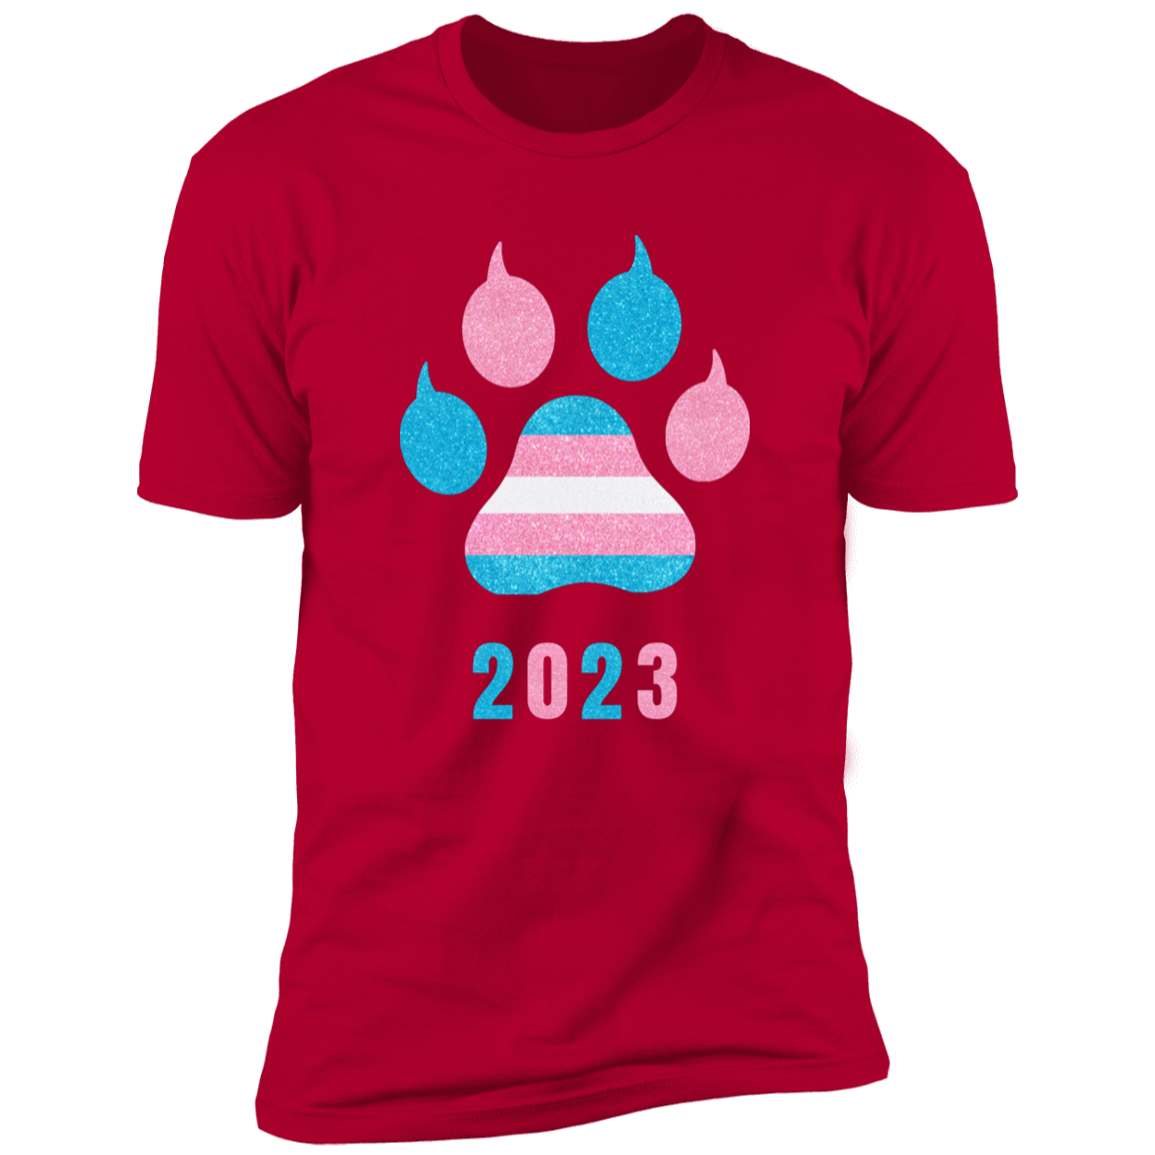 Trans Pride 2023 Cat Paw trans pride t-shirt,  trans cat paw pride shirt for humans, in red